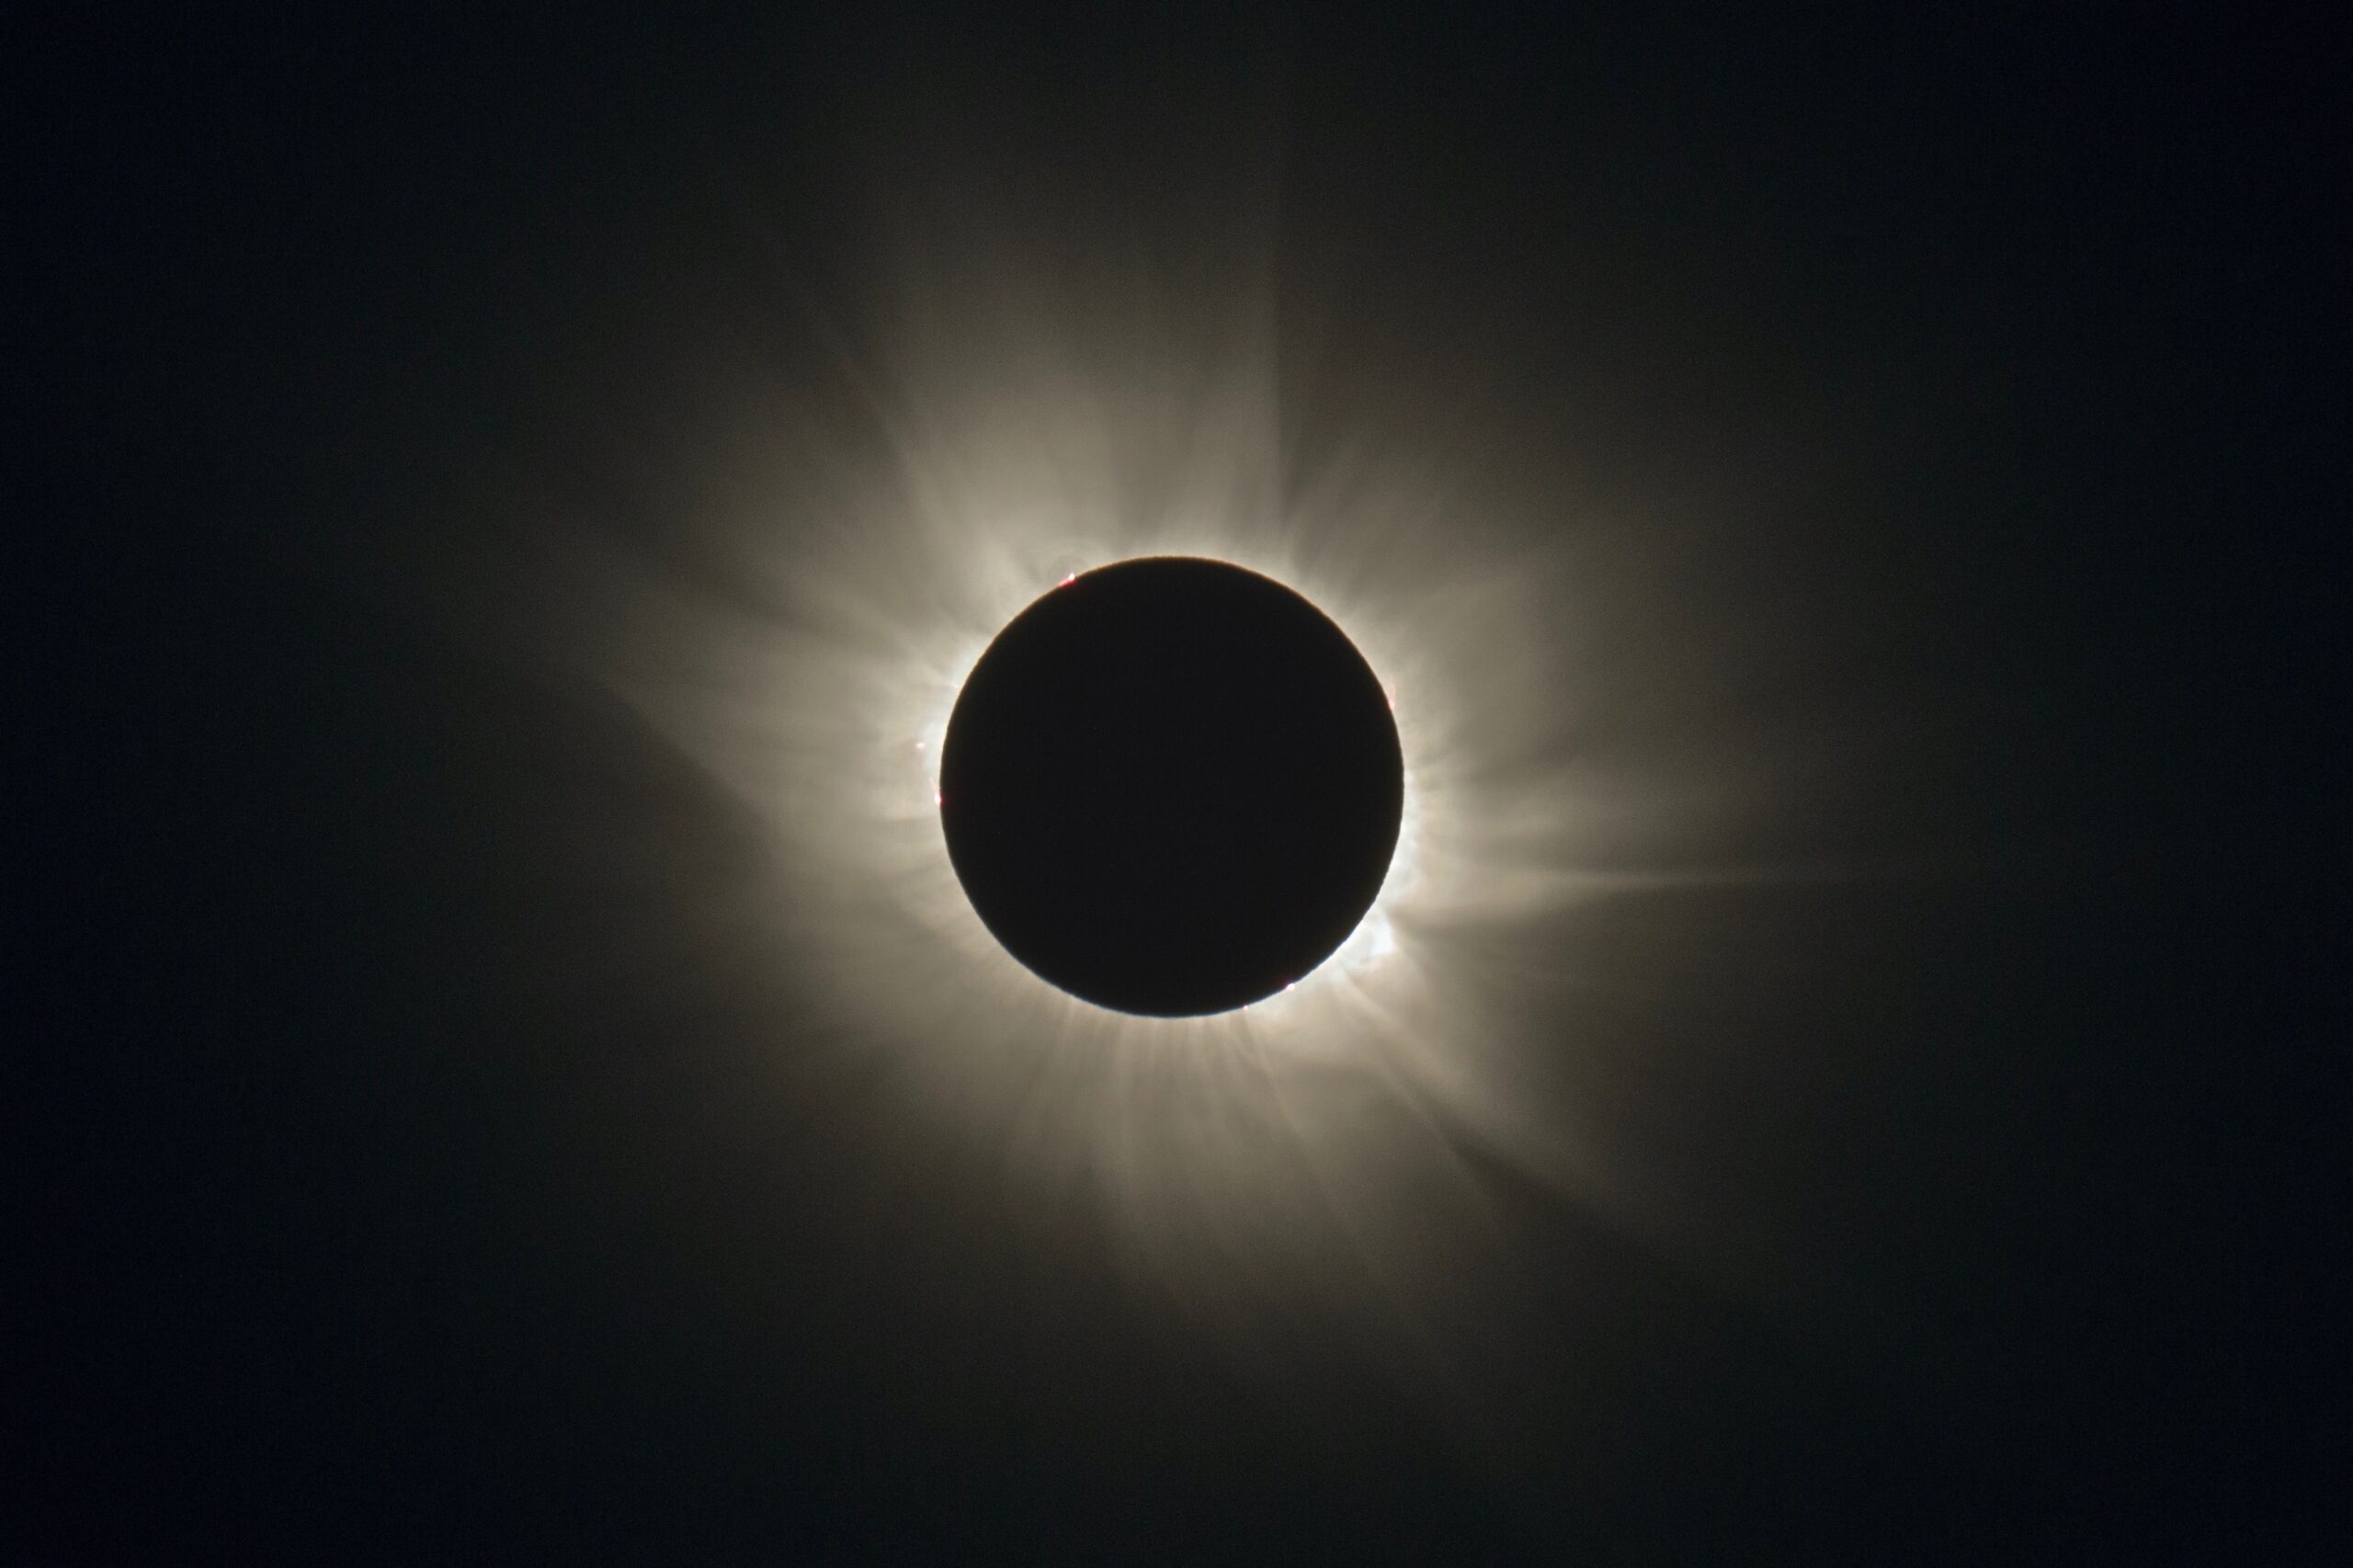 How to watch the last total solar eclipse in the US until 2045